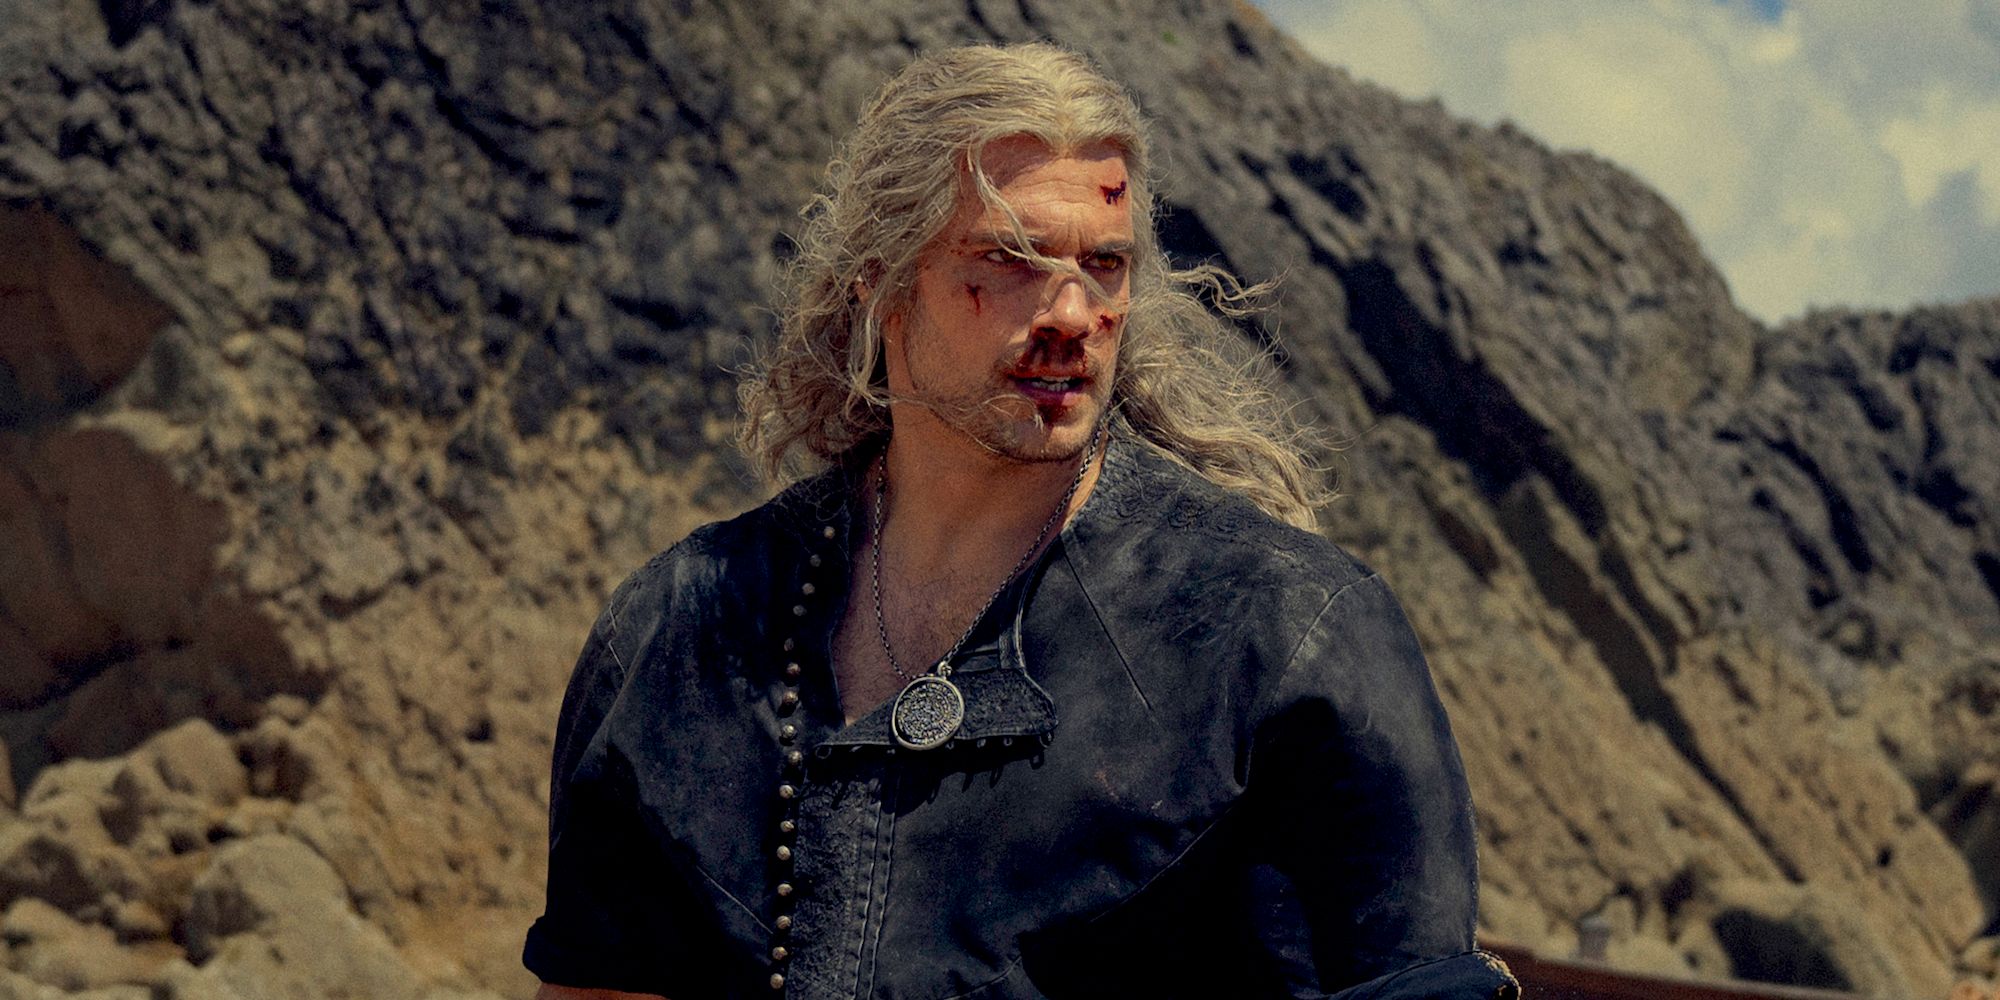 Henry Cavill as a bloodied Geralt with hair in his face in The Witcher season 3, part 2.